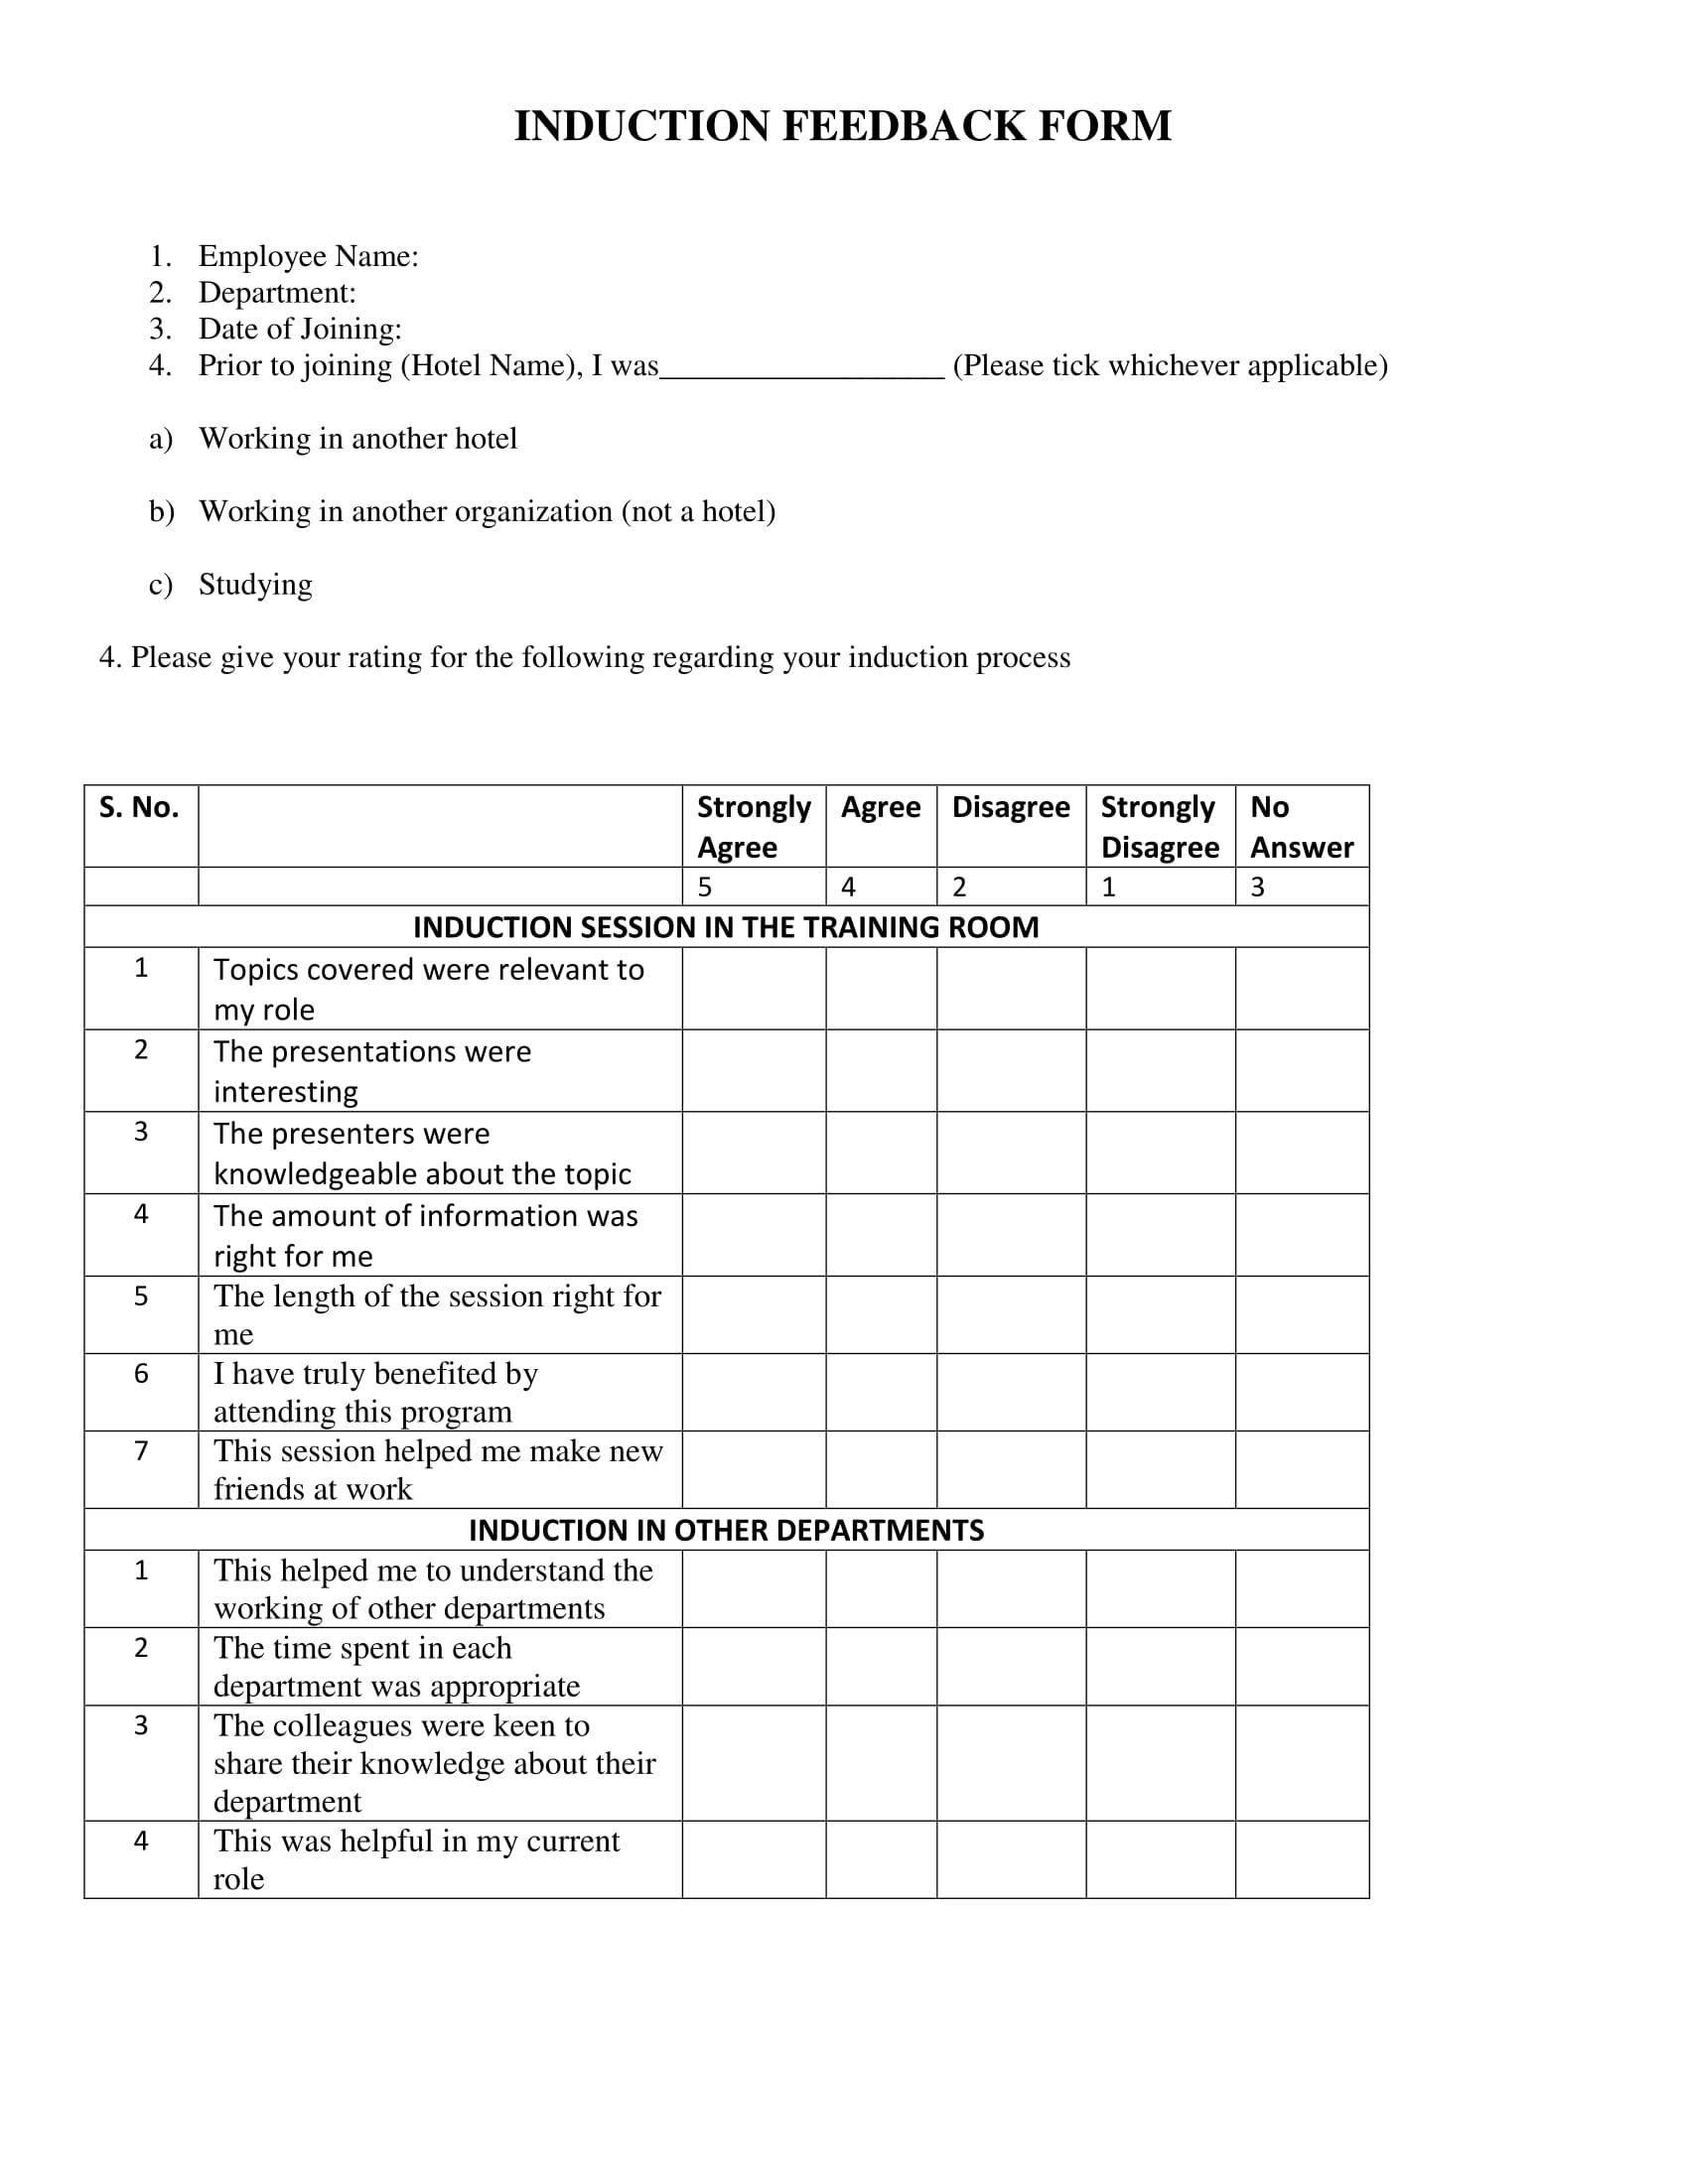 induction feedback review form 1